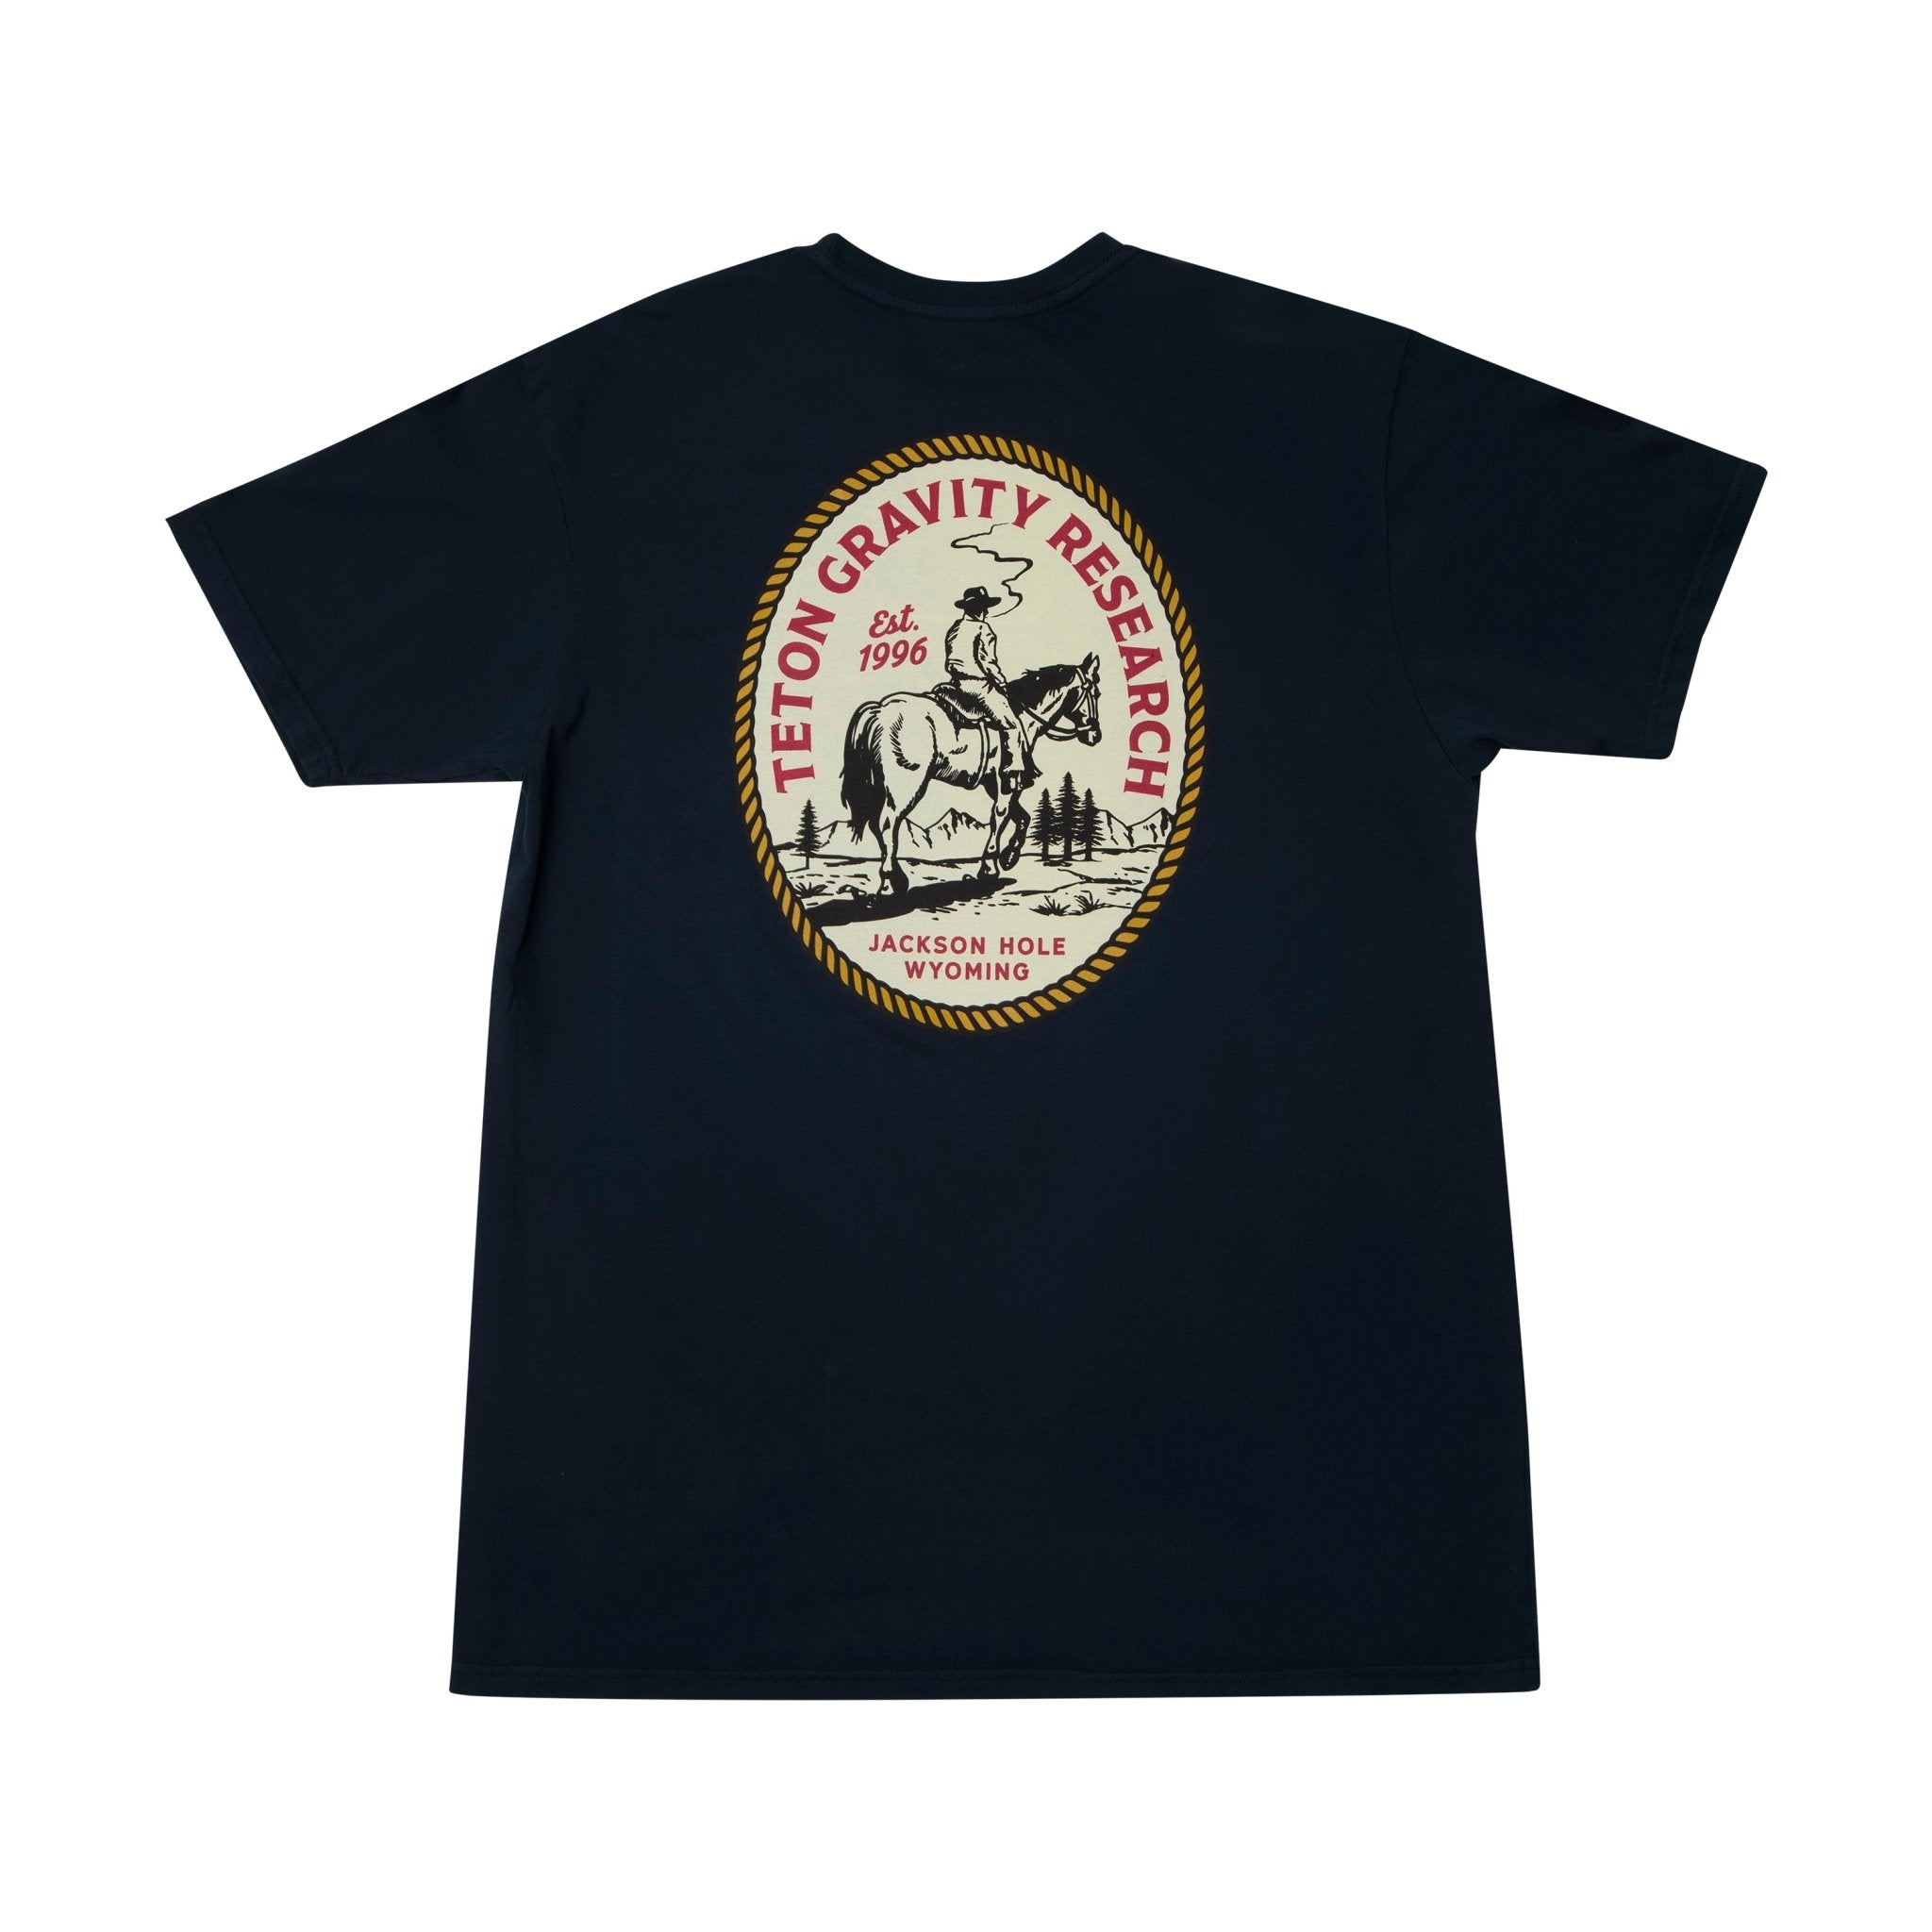 black t-shirt with lonesome cowboy graphic on back of t-shirt. Graphic shows a cowboy on a horse with est. 1996, Jackson hole Wyoming letter on it. #color_navy